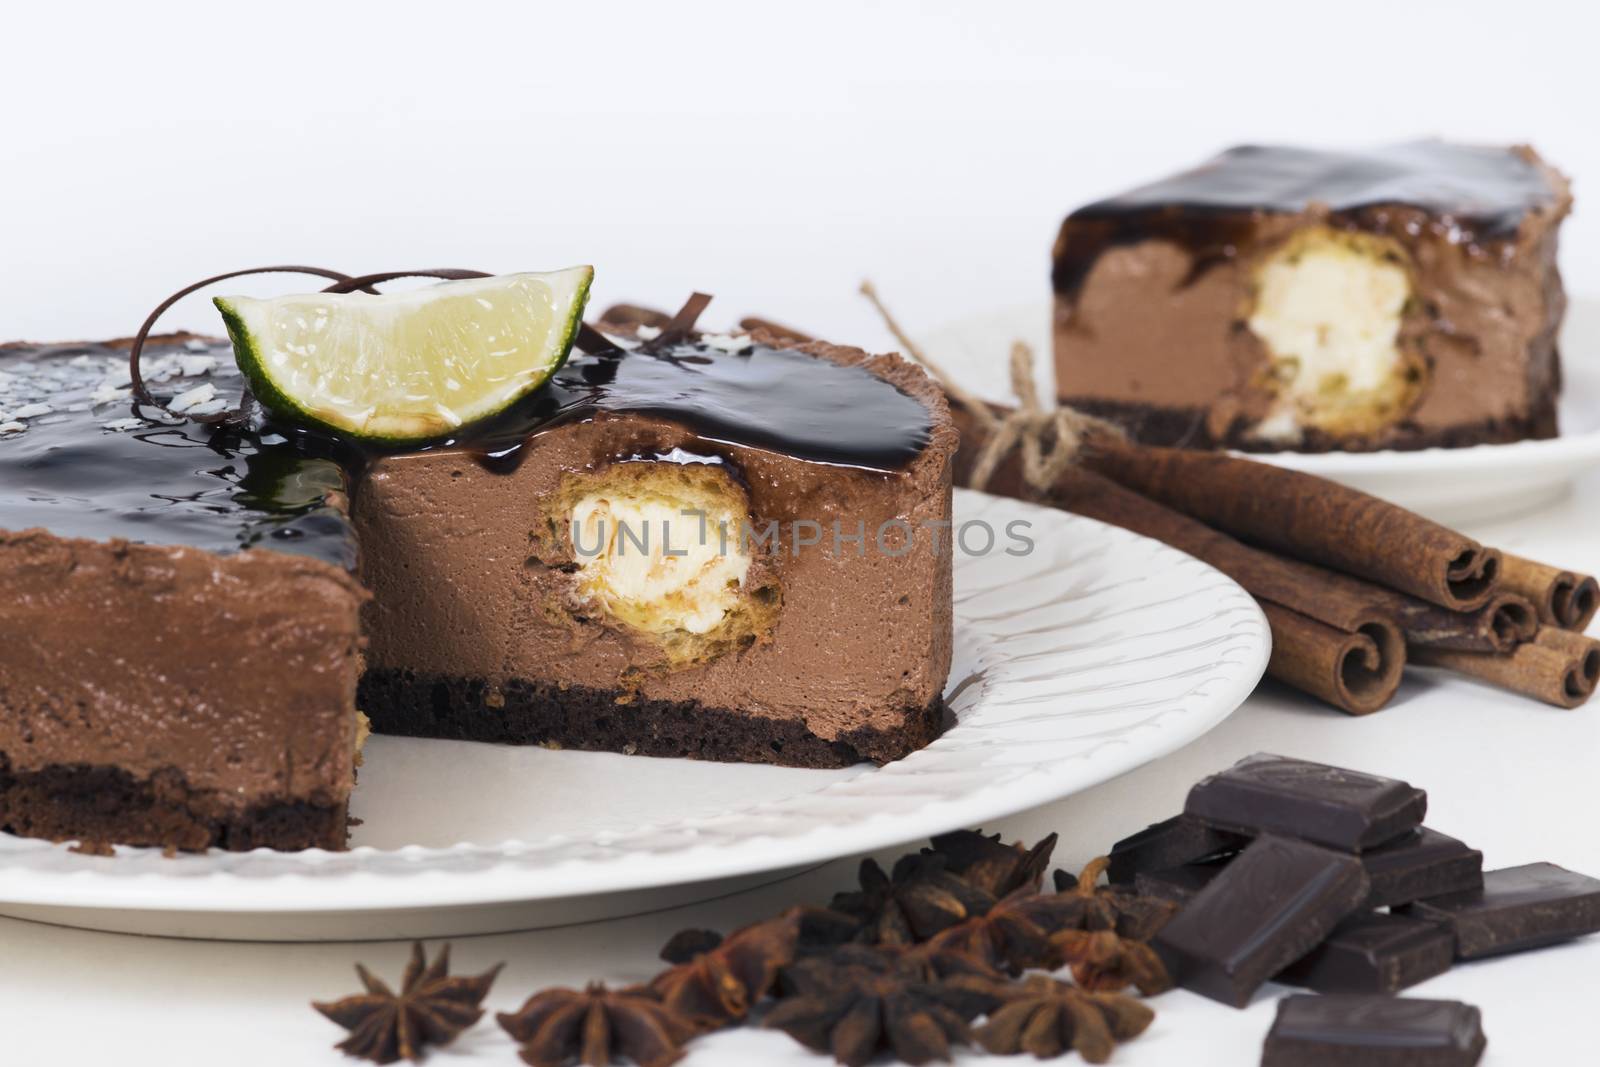 Chocolate souffle cake with eclair inside on a plate on light background